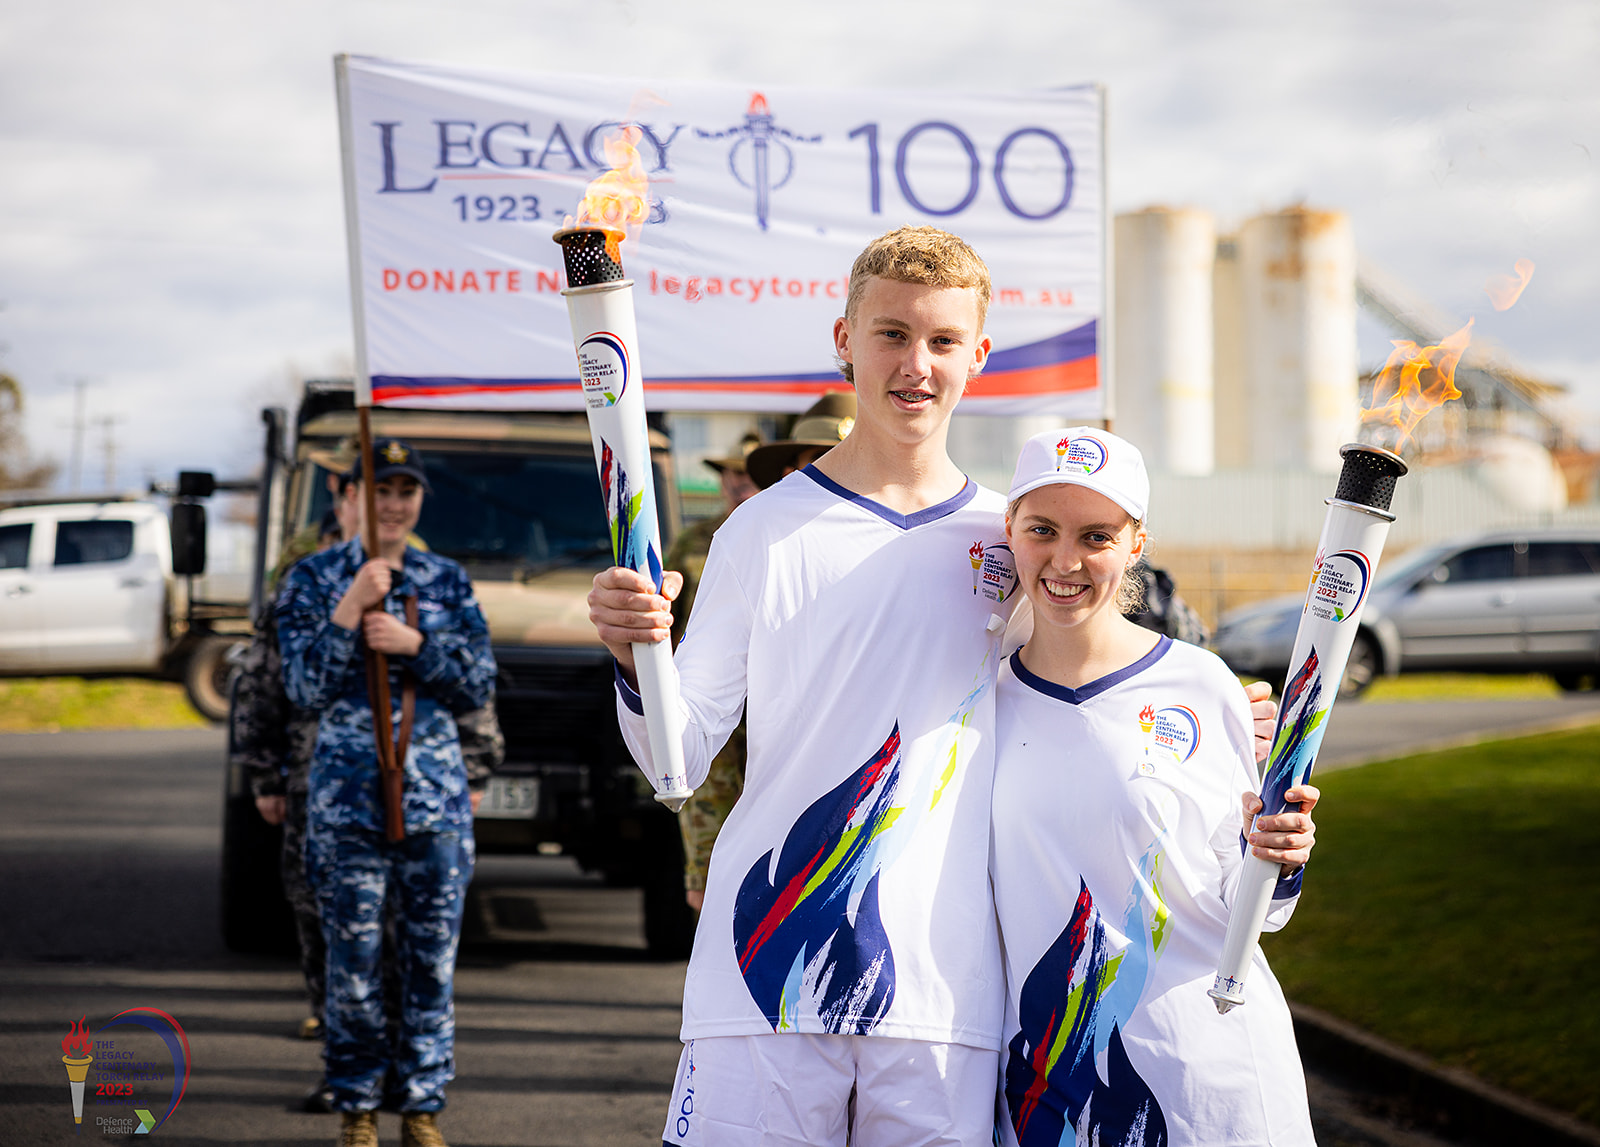 Regional NSW communities welcome Legacy flame